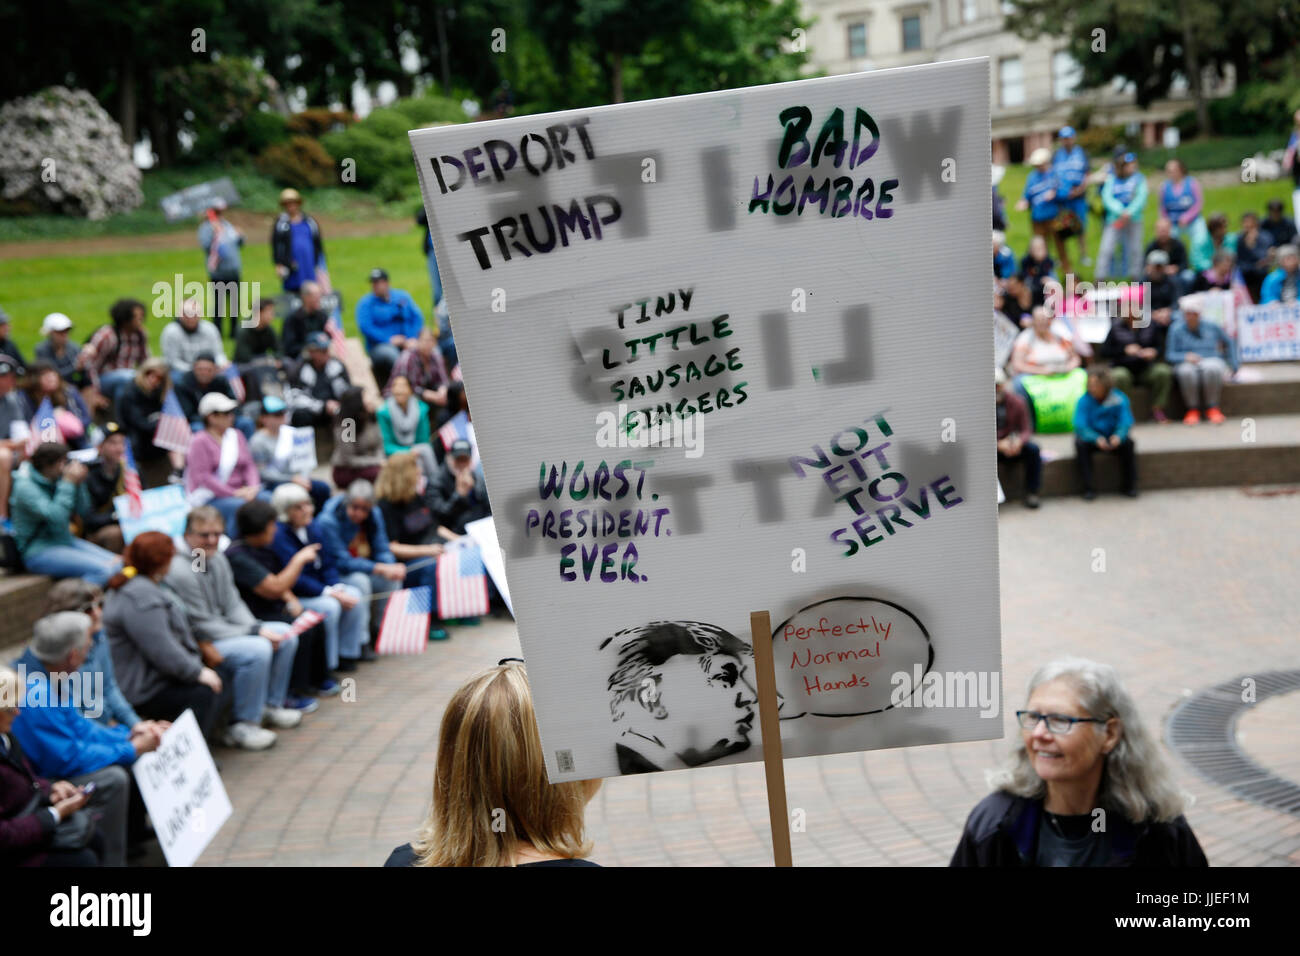 A woman carries a sign while protesting against President Donald Trump at a March for Truth rally on June 3, 2017. Portland, Oregon, United States. Stock Photo